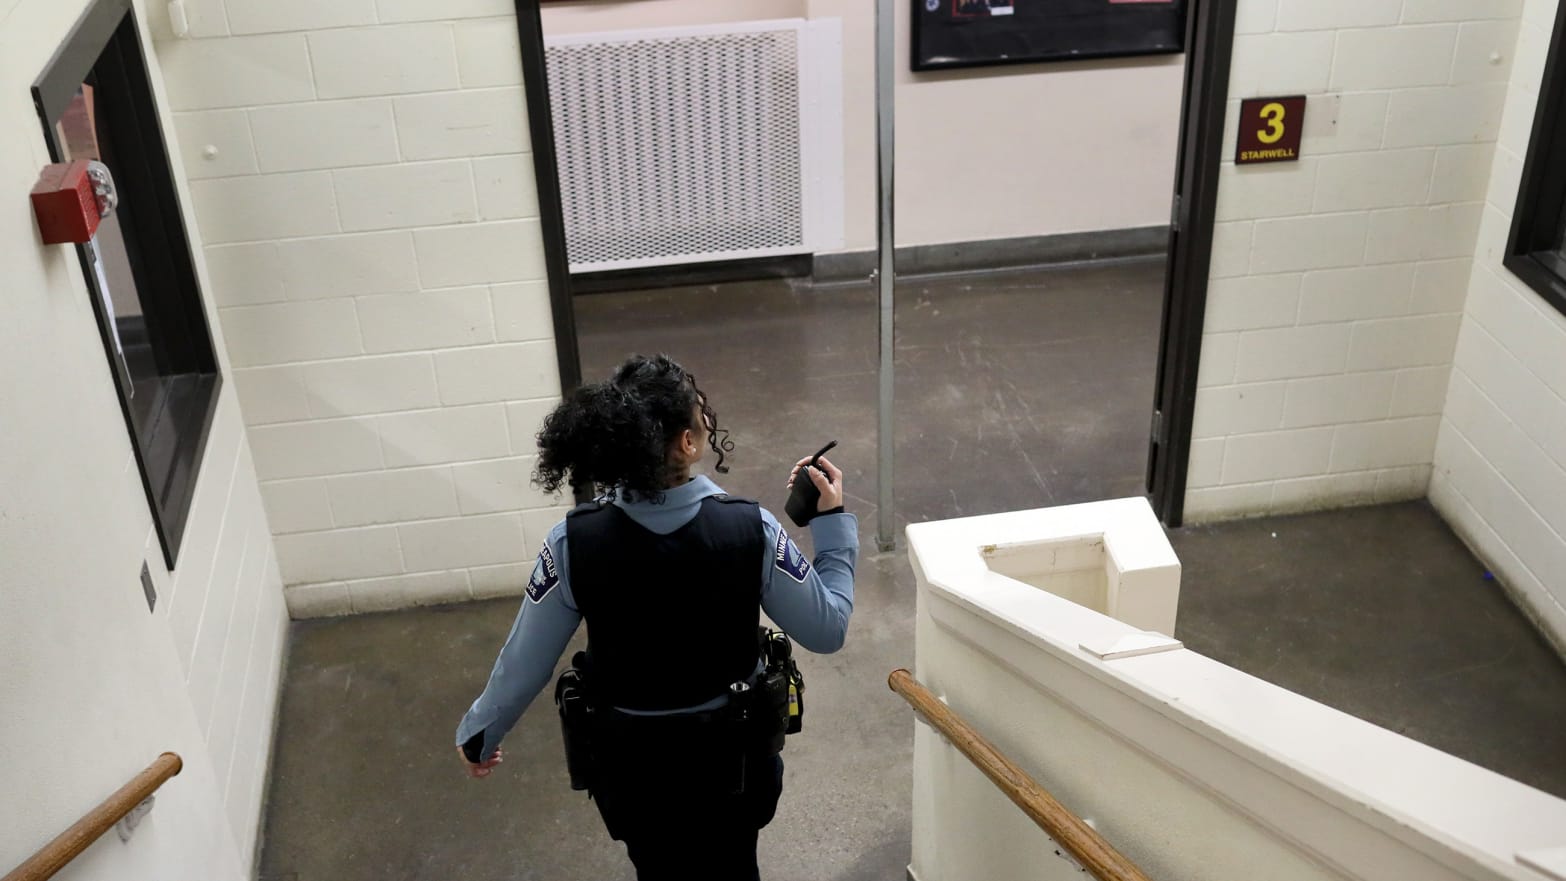 Minneapolis Police officer and school resource officer Drea Leal does her rounds in the hallways